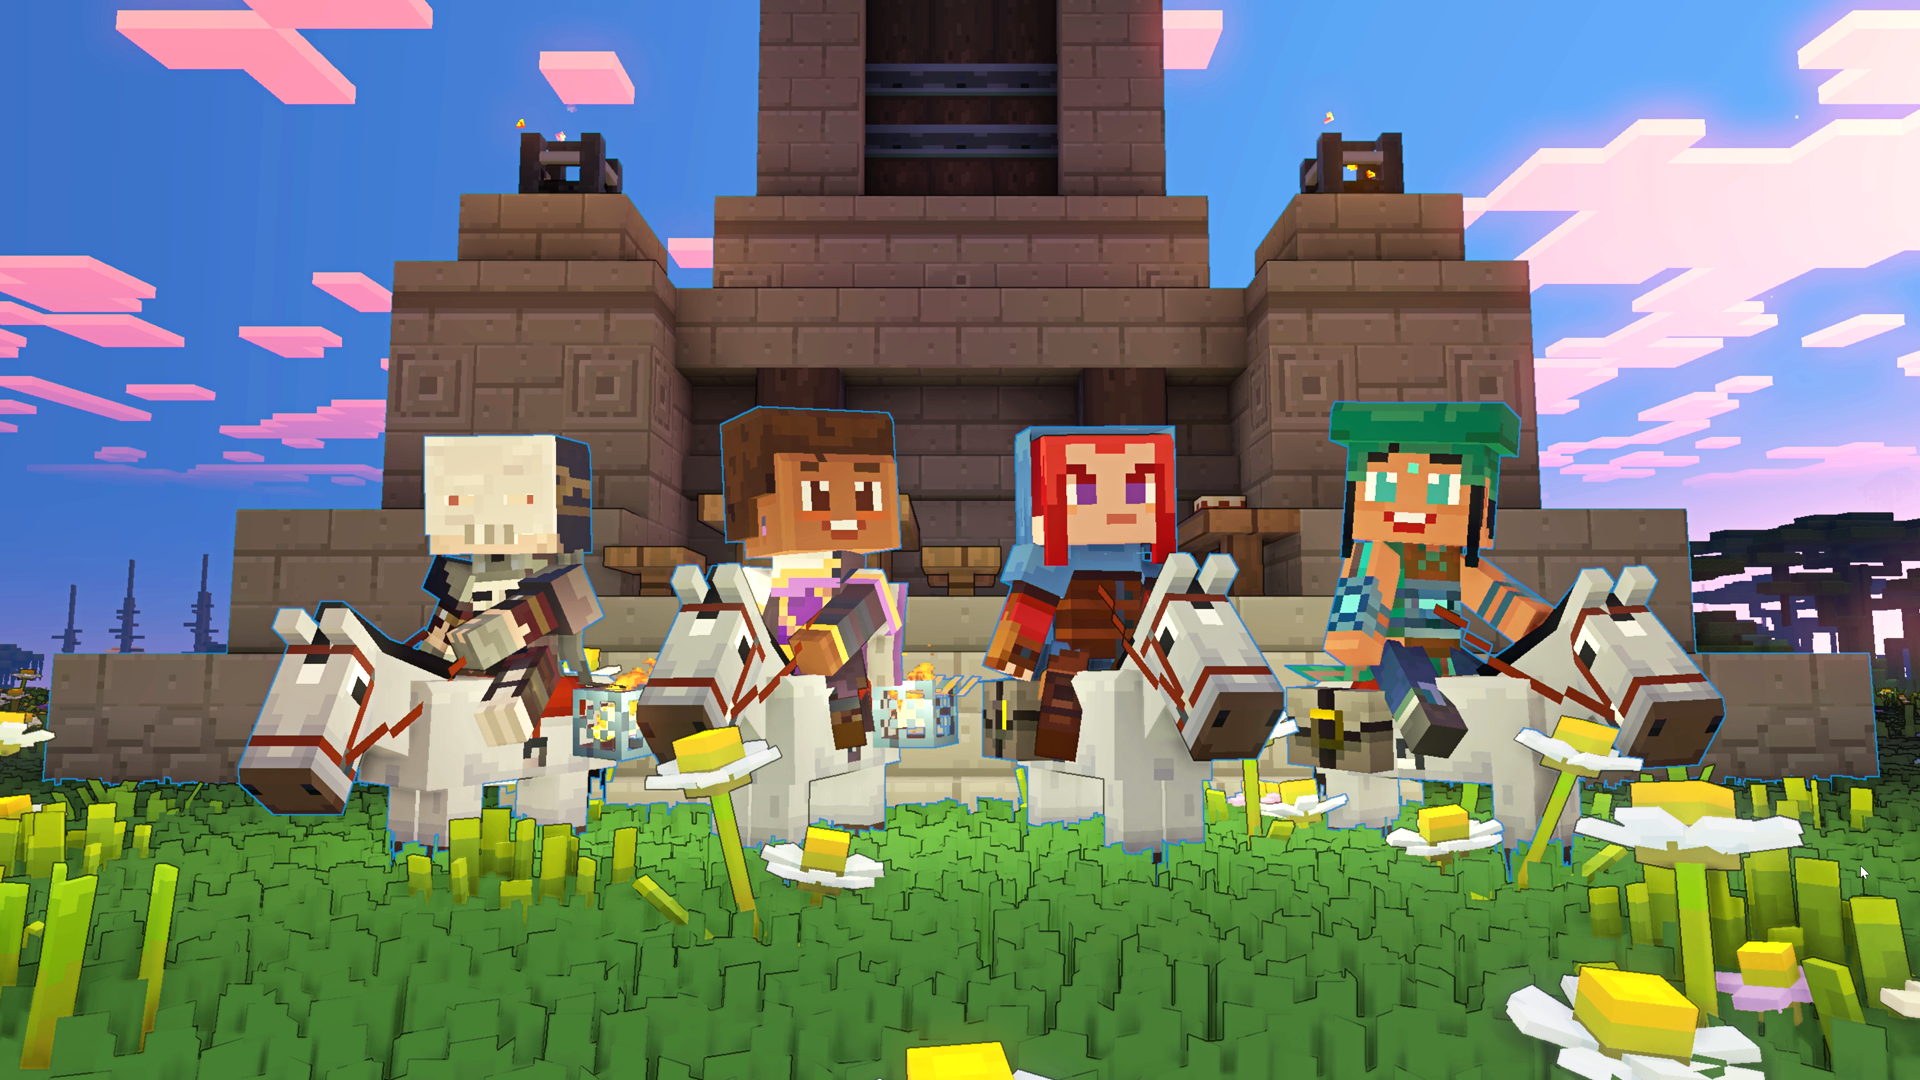 Minecraft Legends: when will it be on Game Pass and how to play for free on  Xbox - Meristation